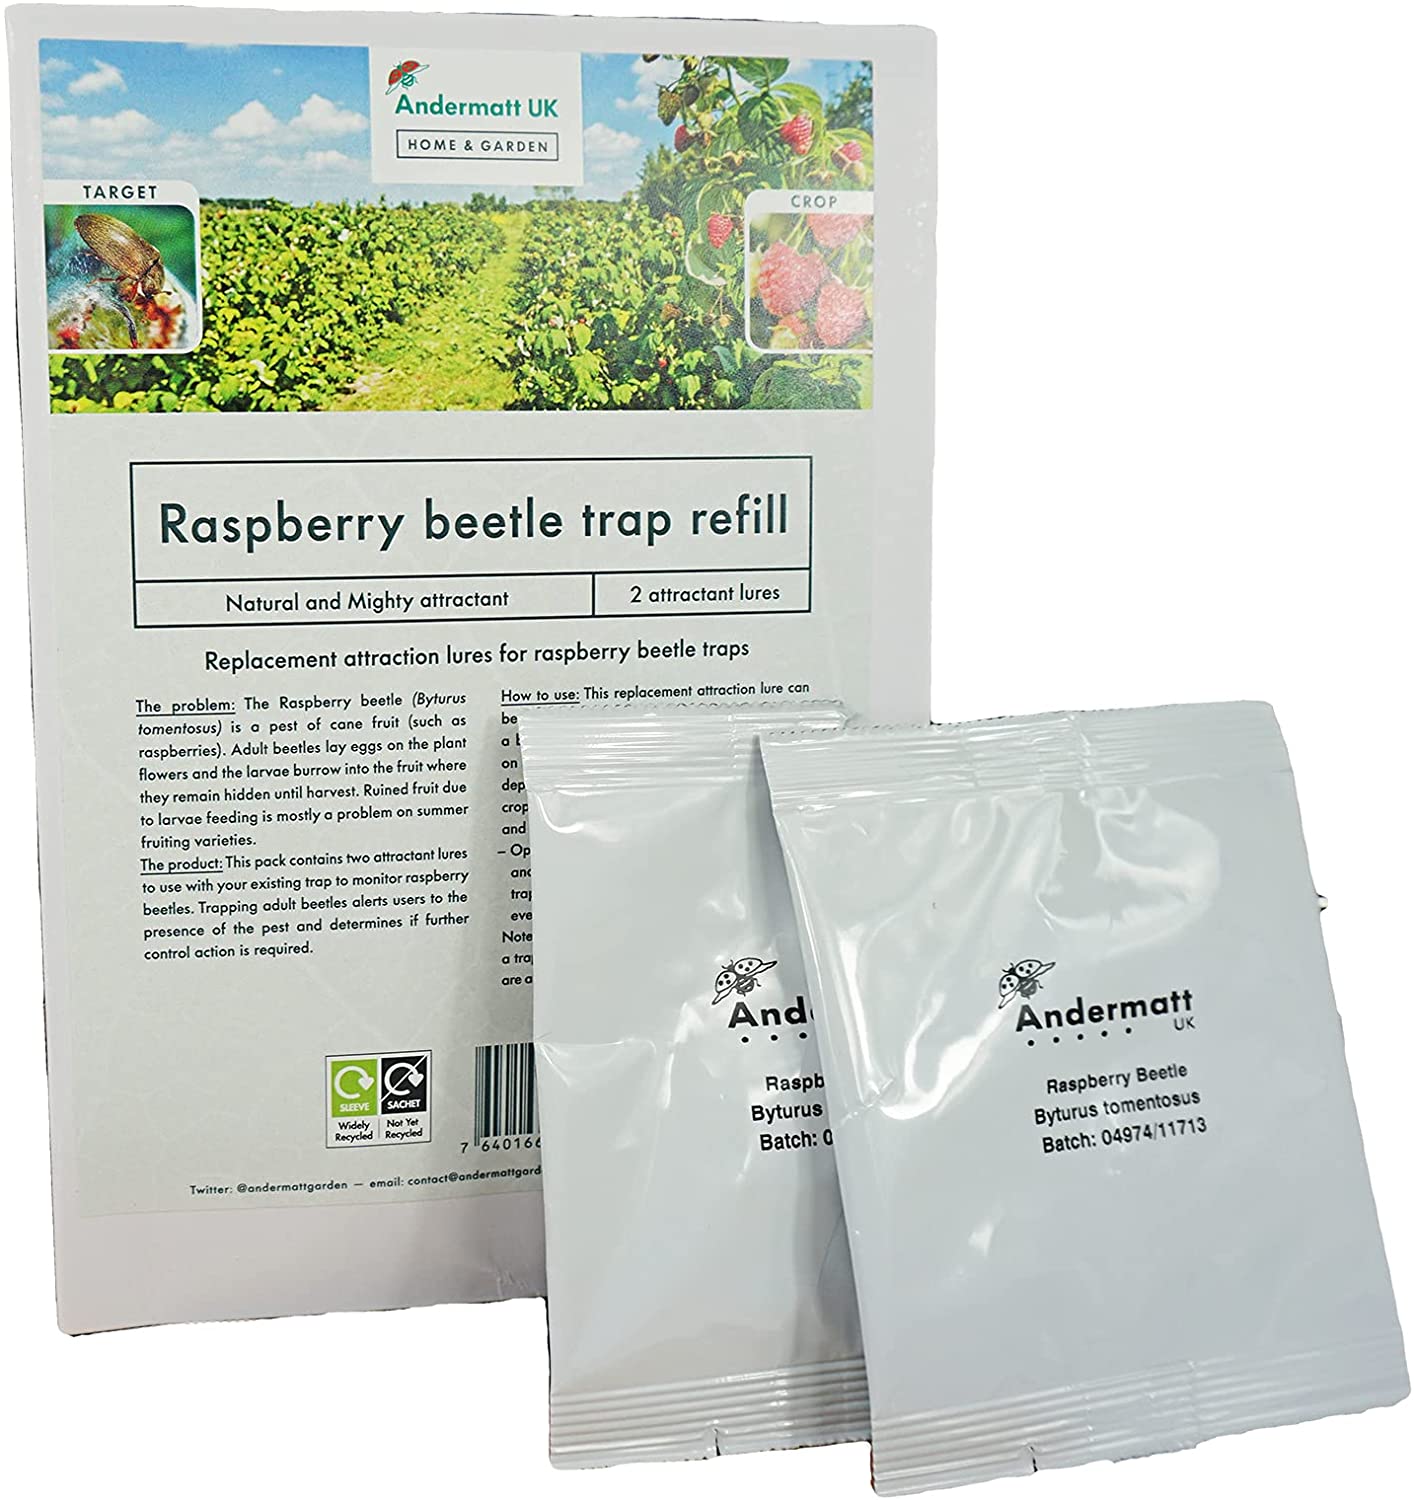 Photo of raspberry beetle trap packaging.